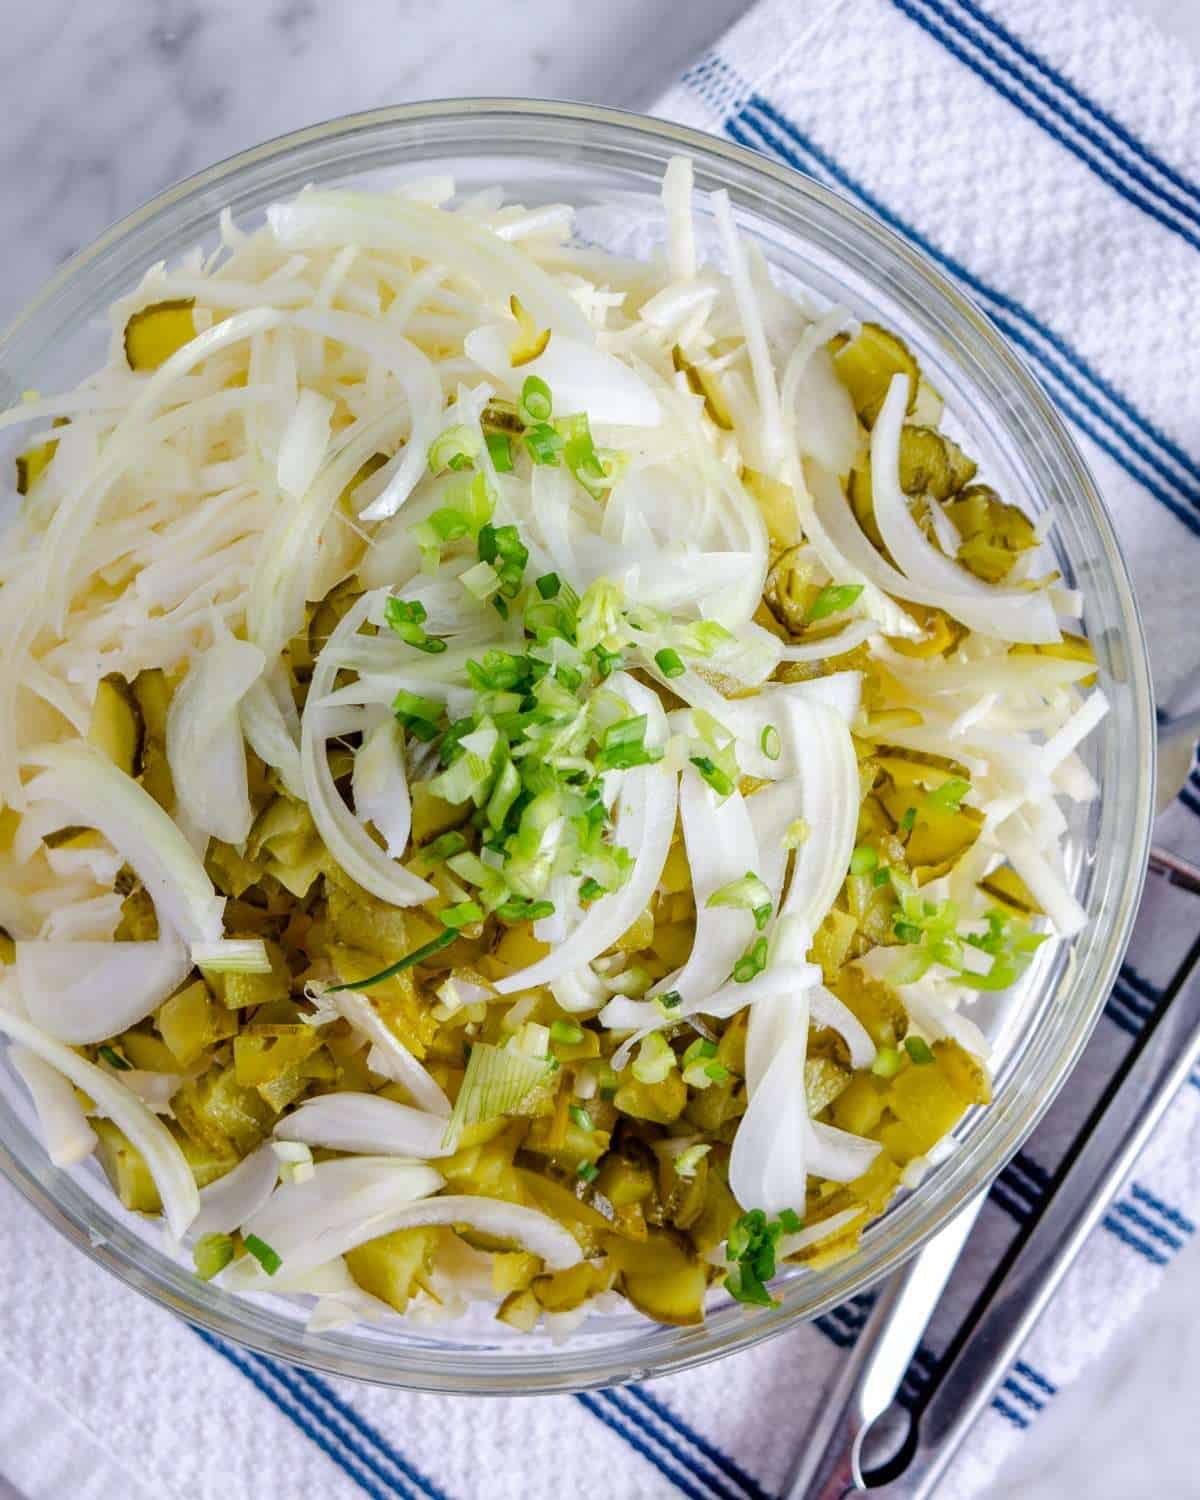 Low carb coleslaw with dill pickles, and onions in a bowl